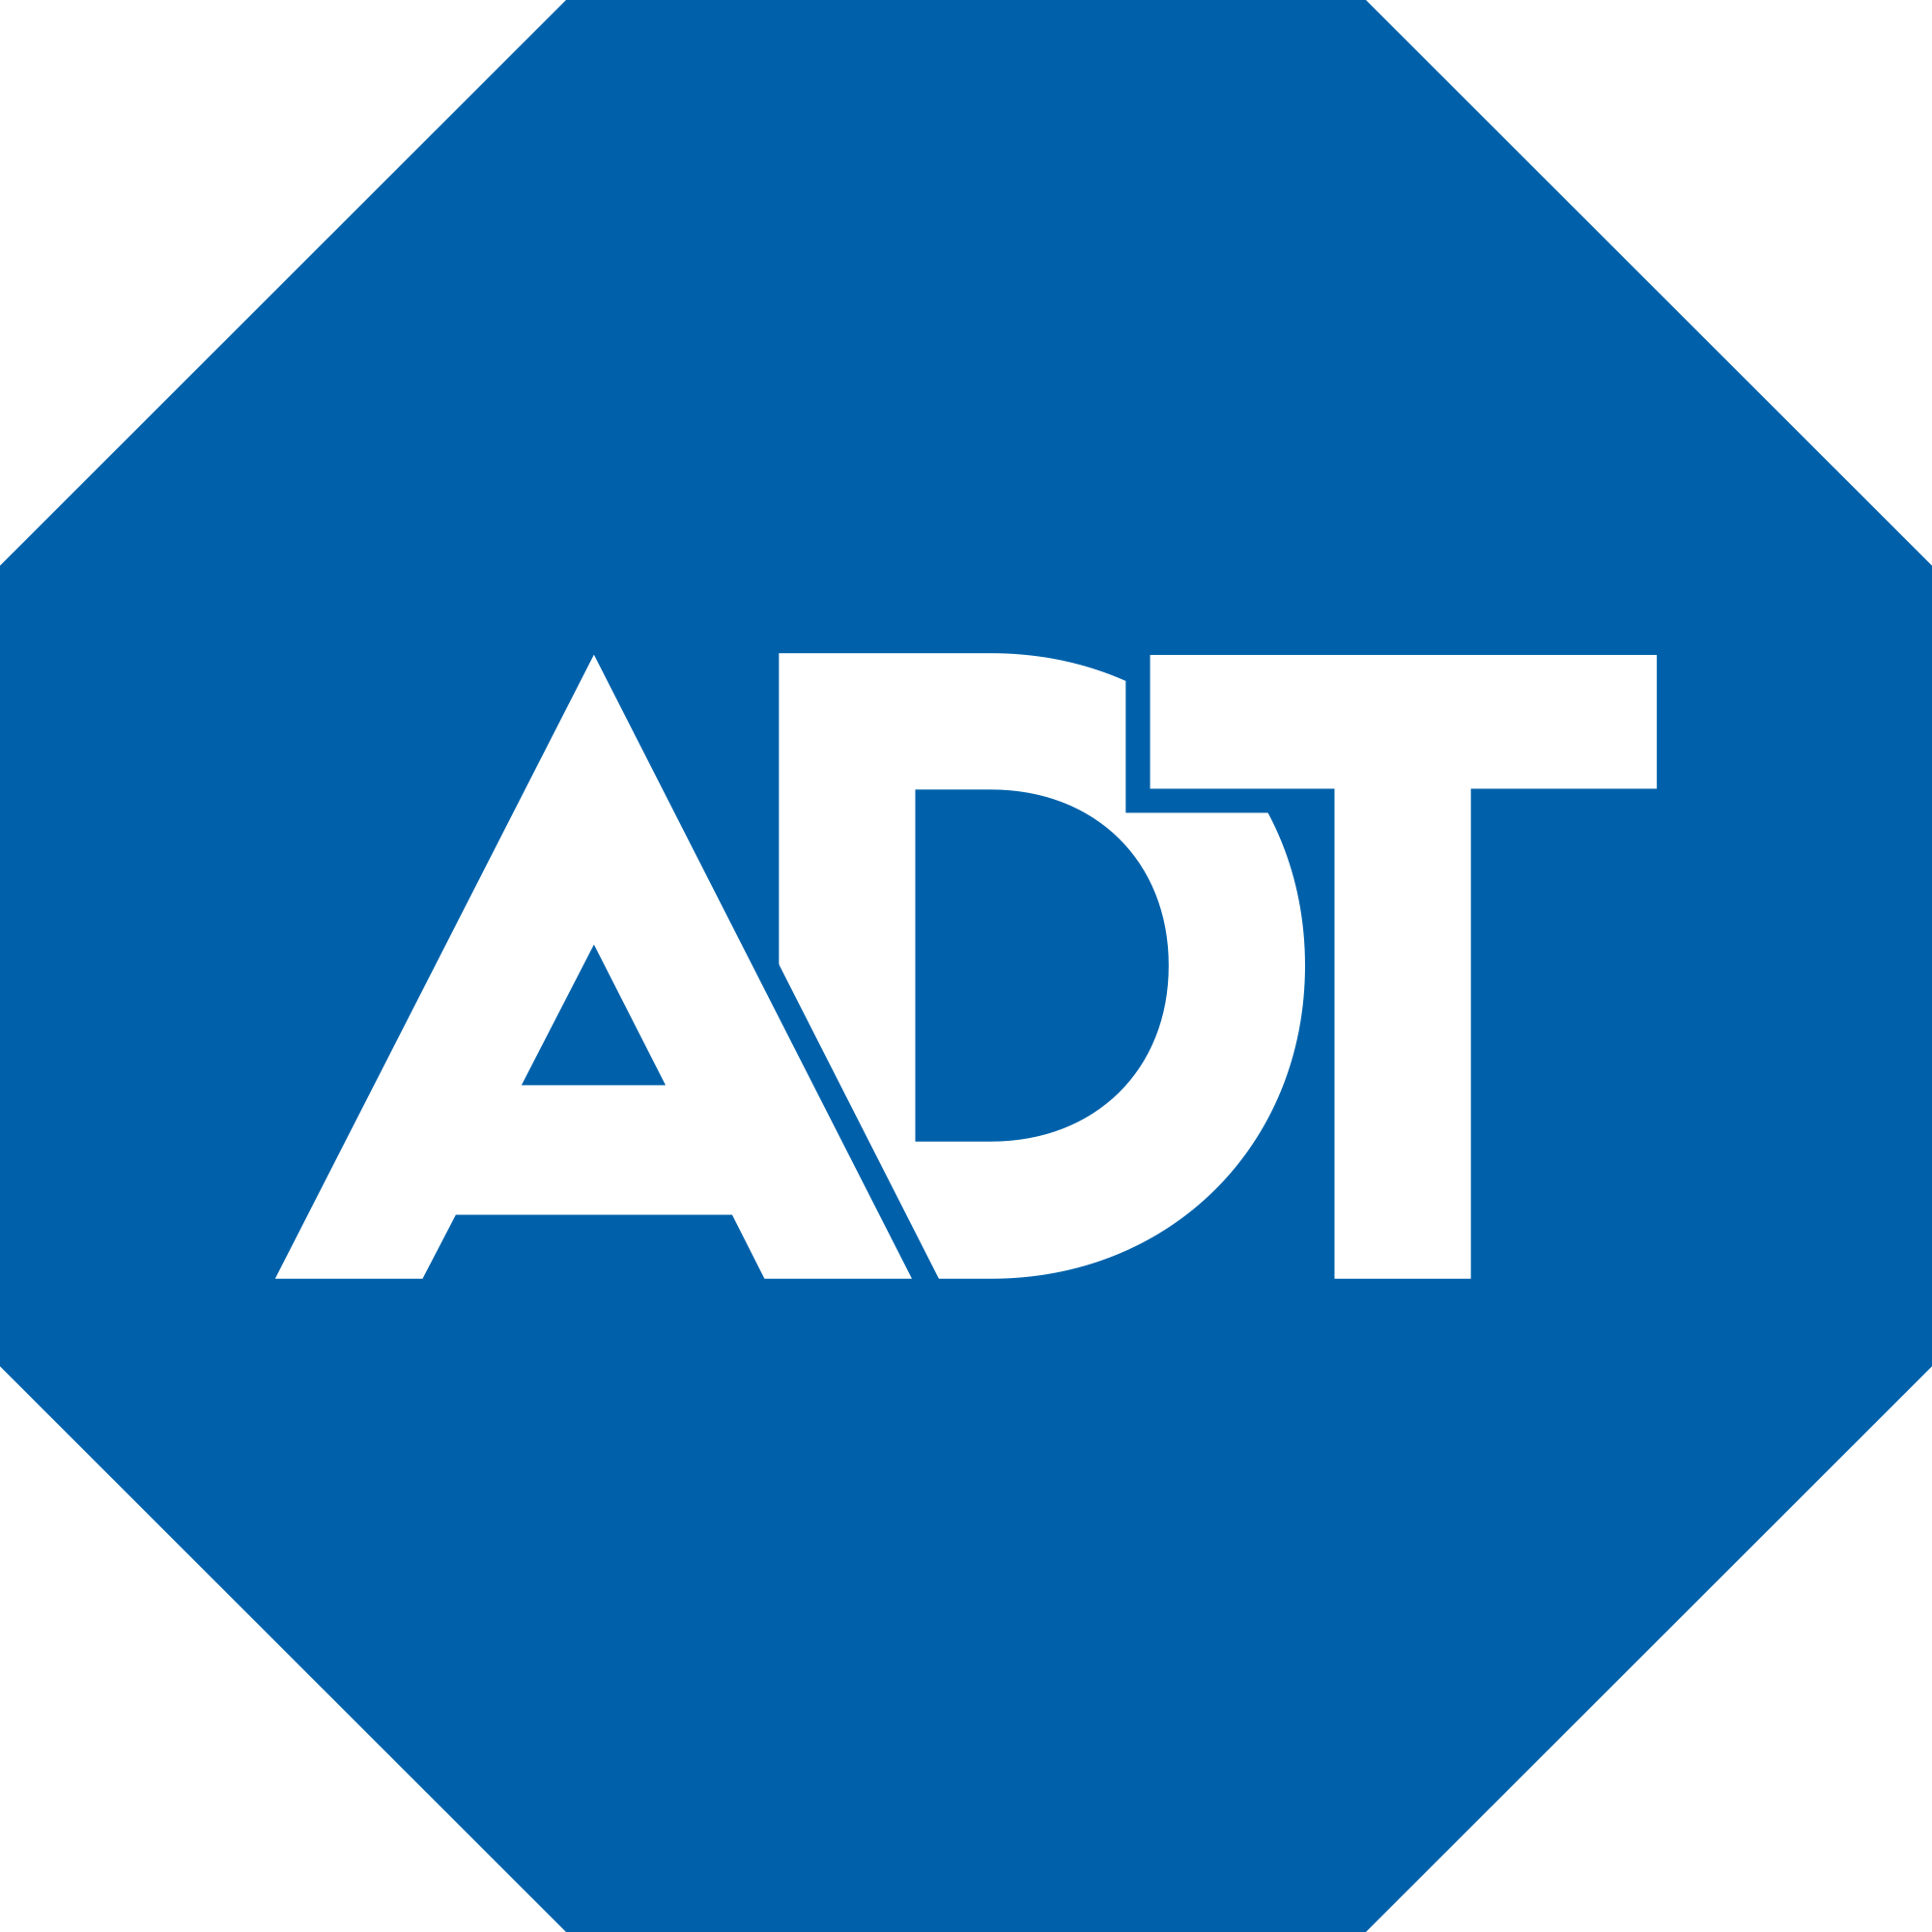 ADT Logo - File:ADT Security Services Logo.svg - Wikimedia Commons